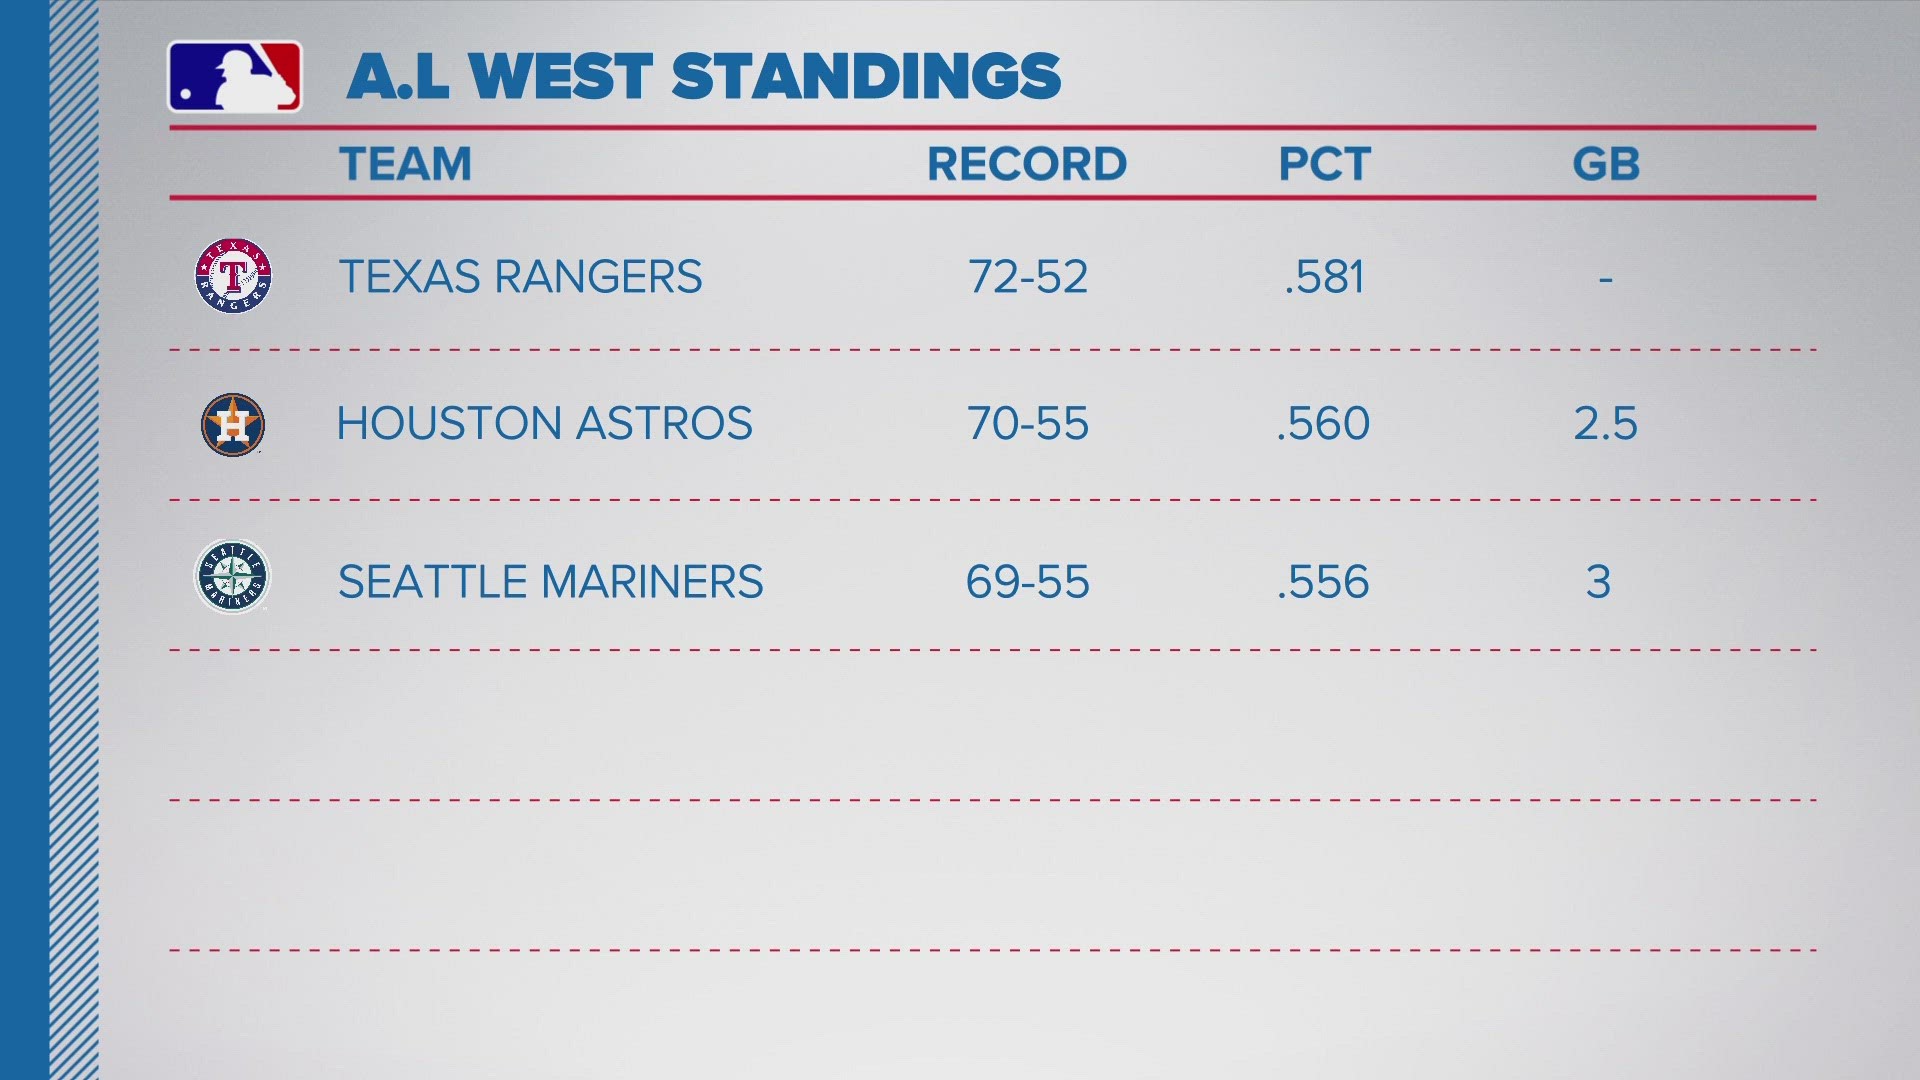 The Mariners are on a hot streak, and are closing on their AL West rivals in the playoff standings.